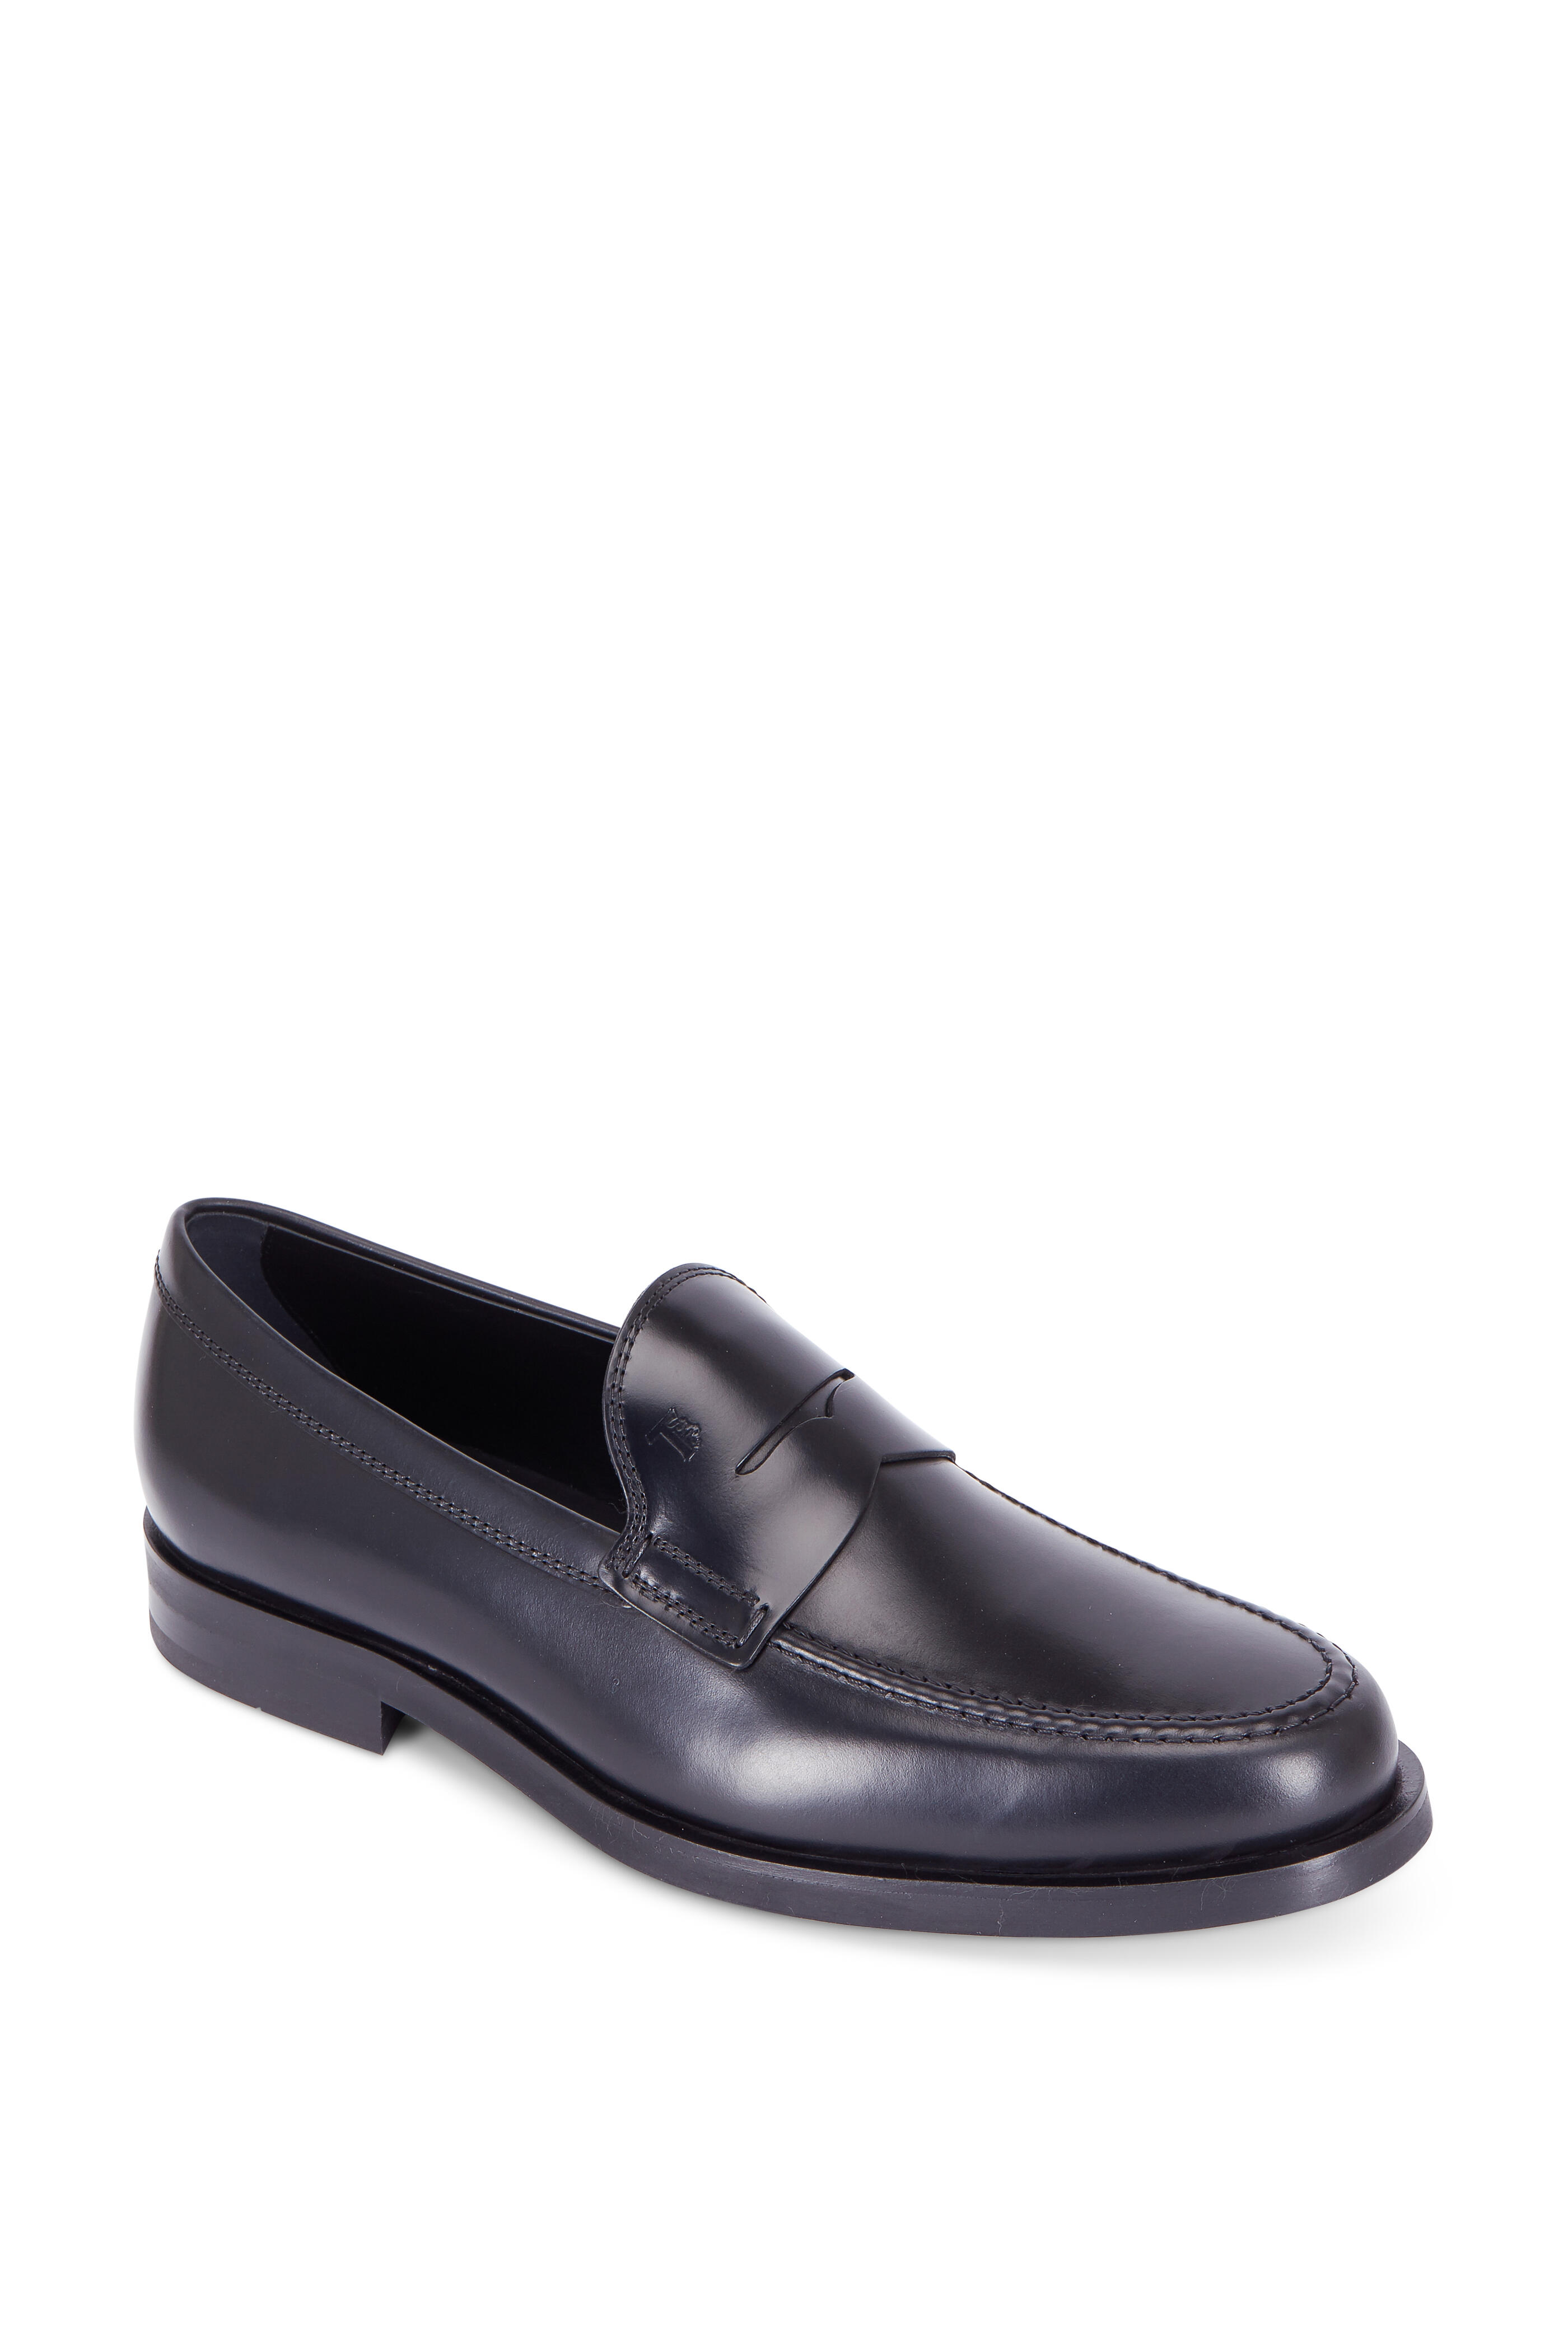 Tod's - Gomma Black Leather Penny Loafer | Mitchell Stores